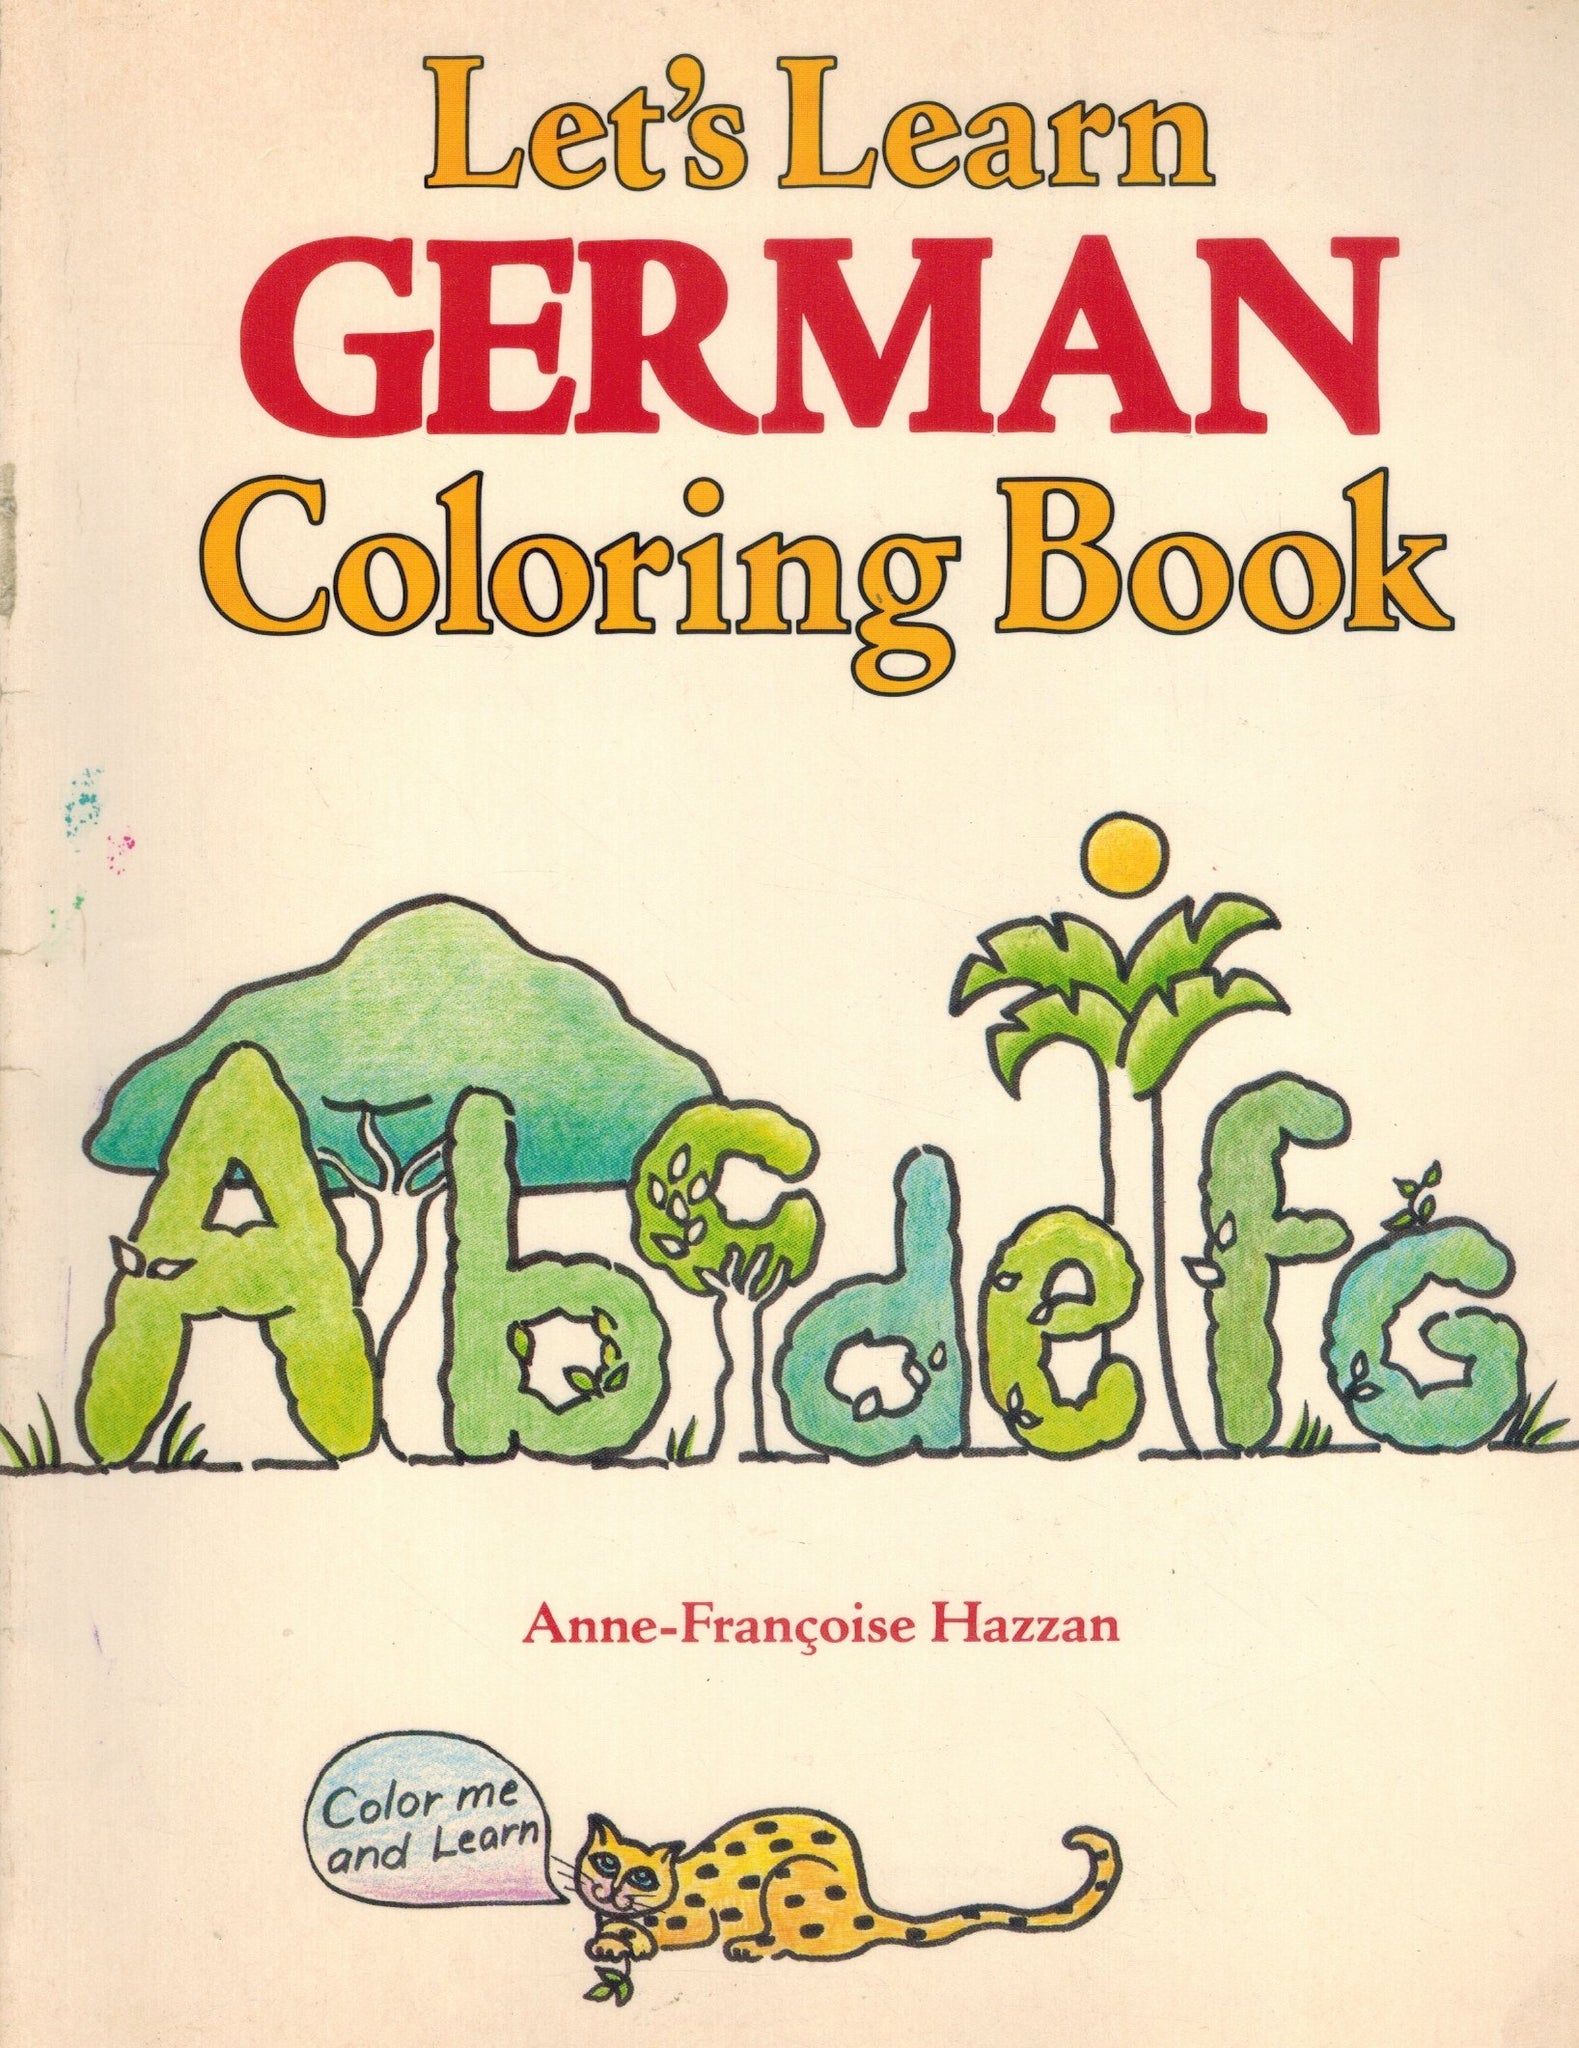 LET'S LEARN GERMAN COLORING BOOK  by Hazzan, Anne-Francoise